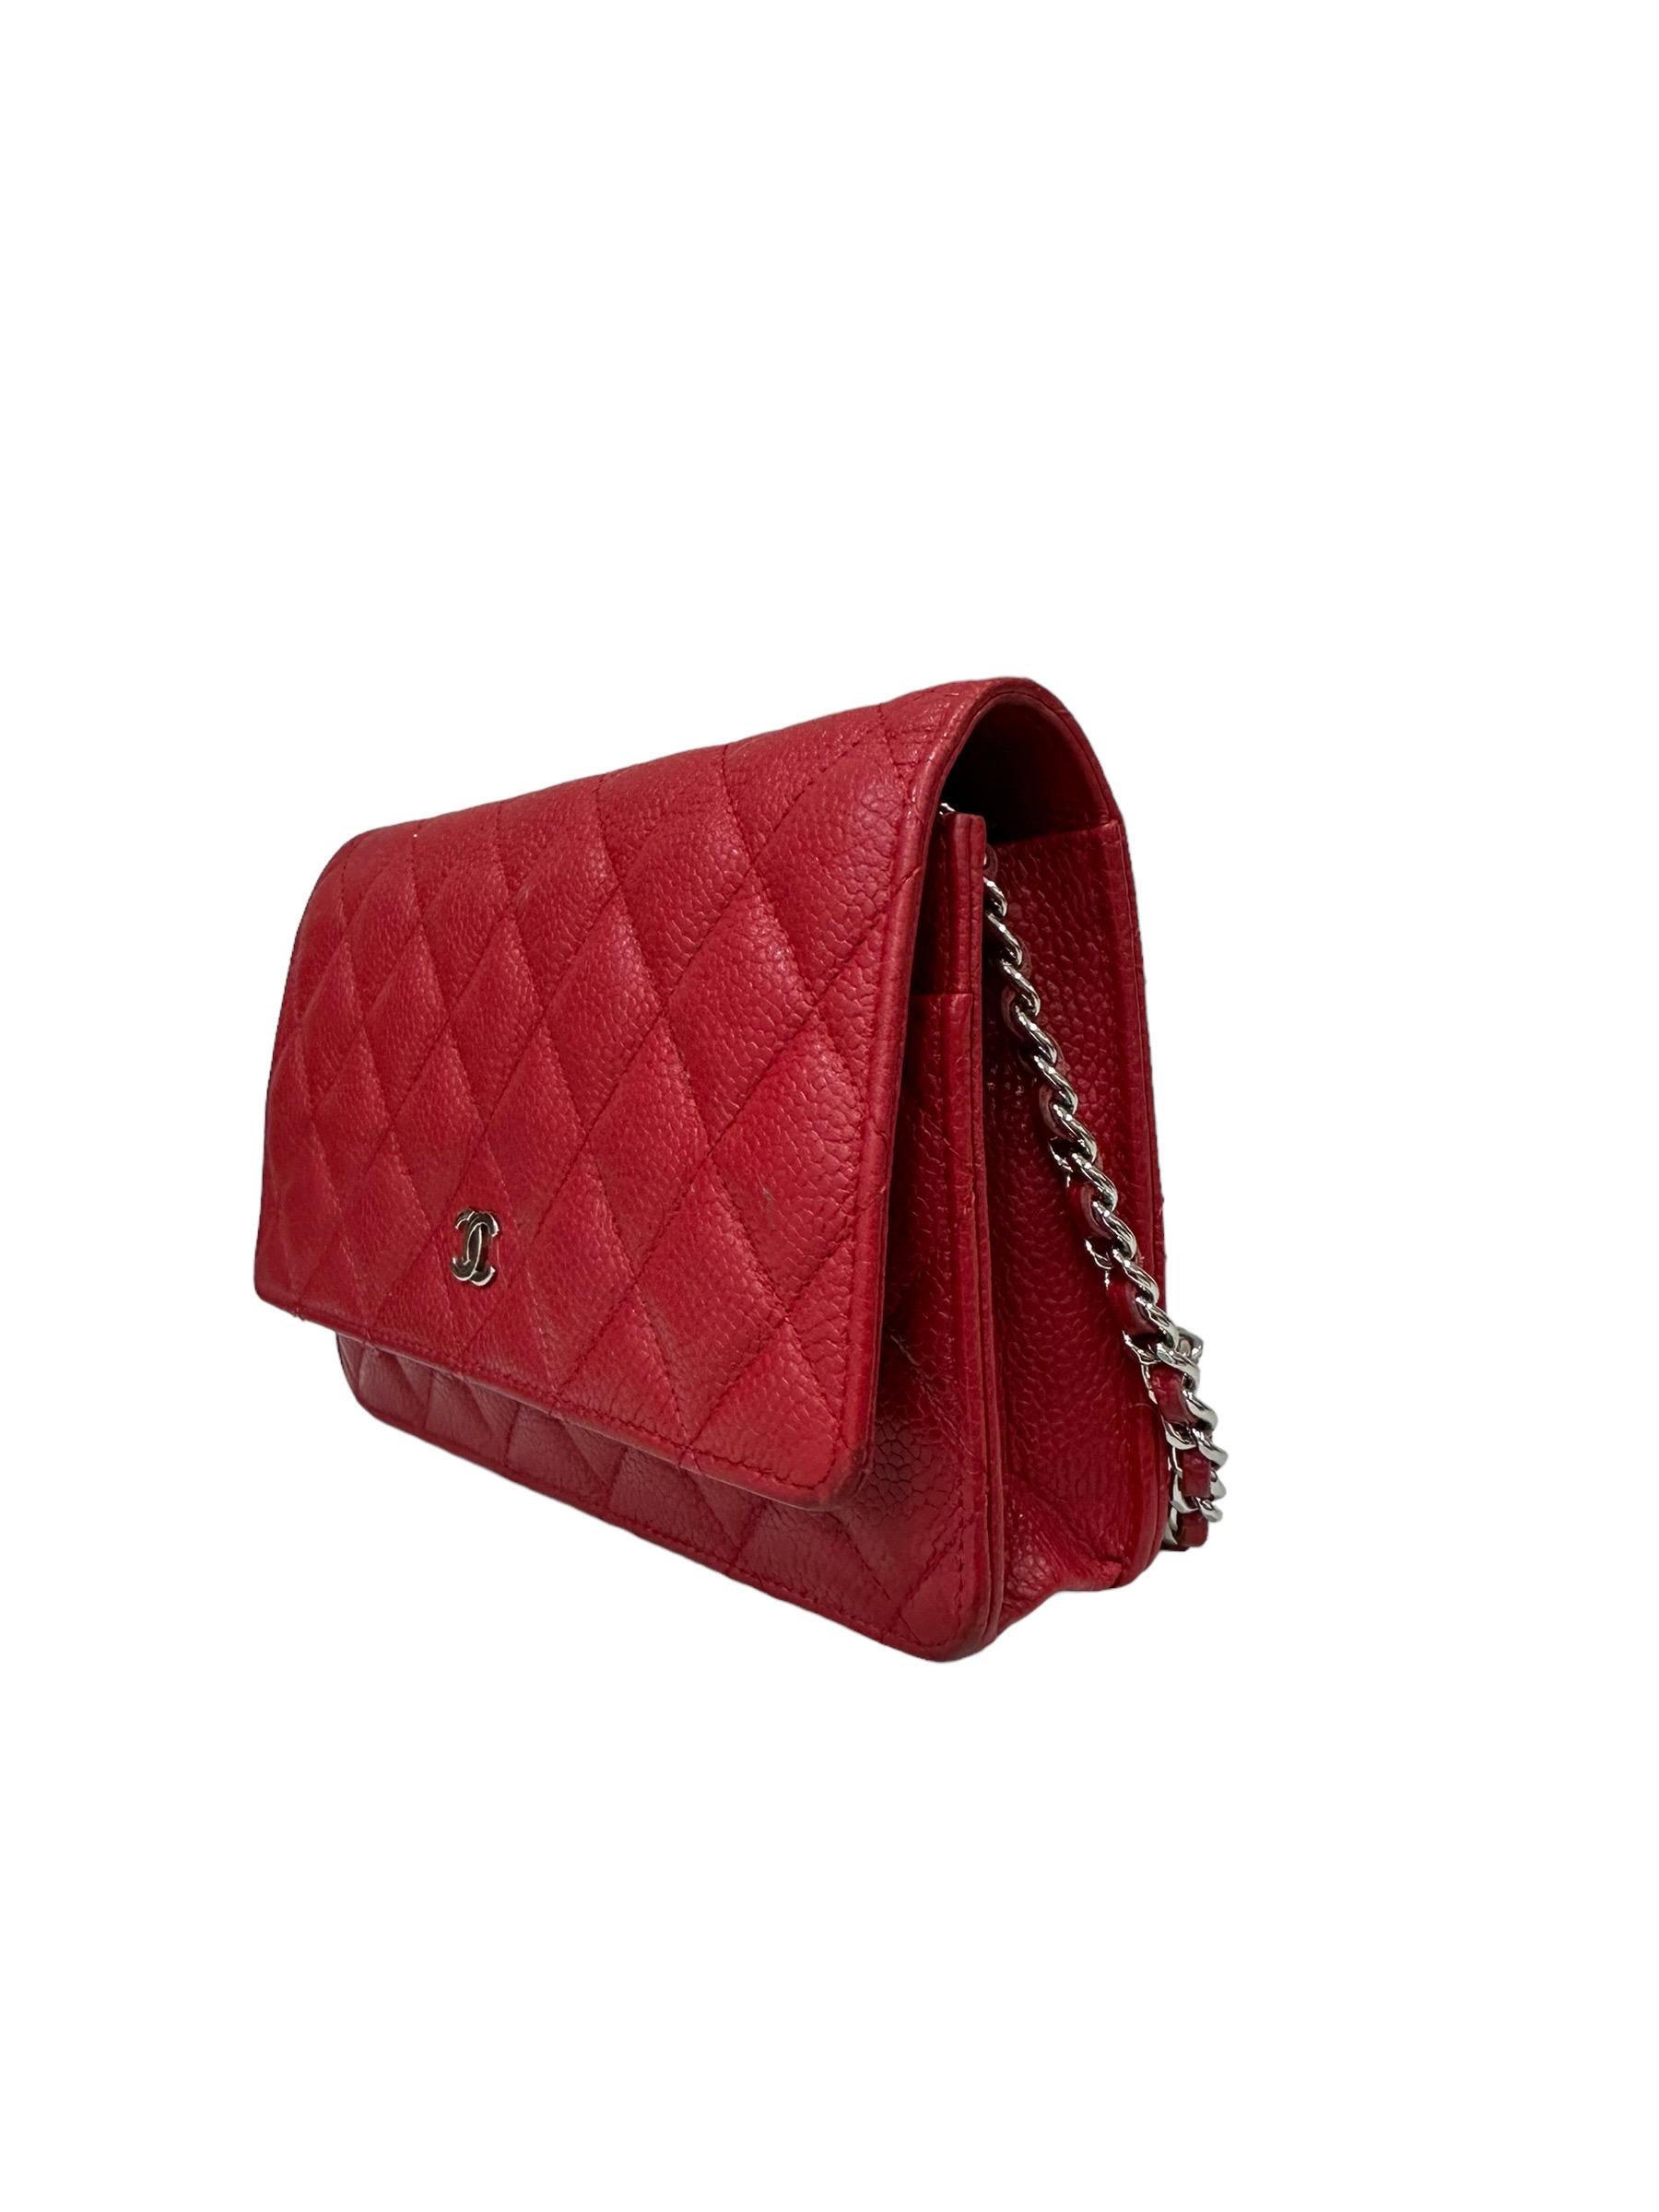 2013 Chanel Woc Caviar Red Crossbody Bag In Good Condition In Torre Del Greco, IT